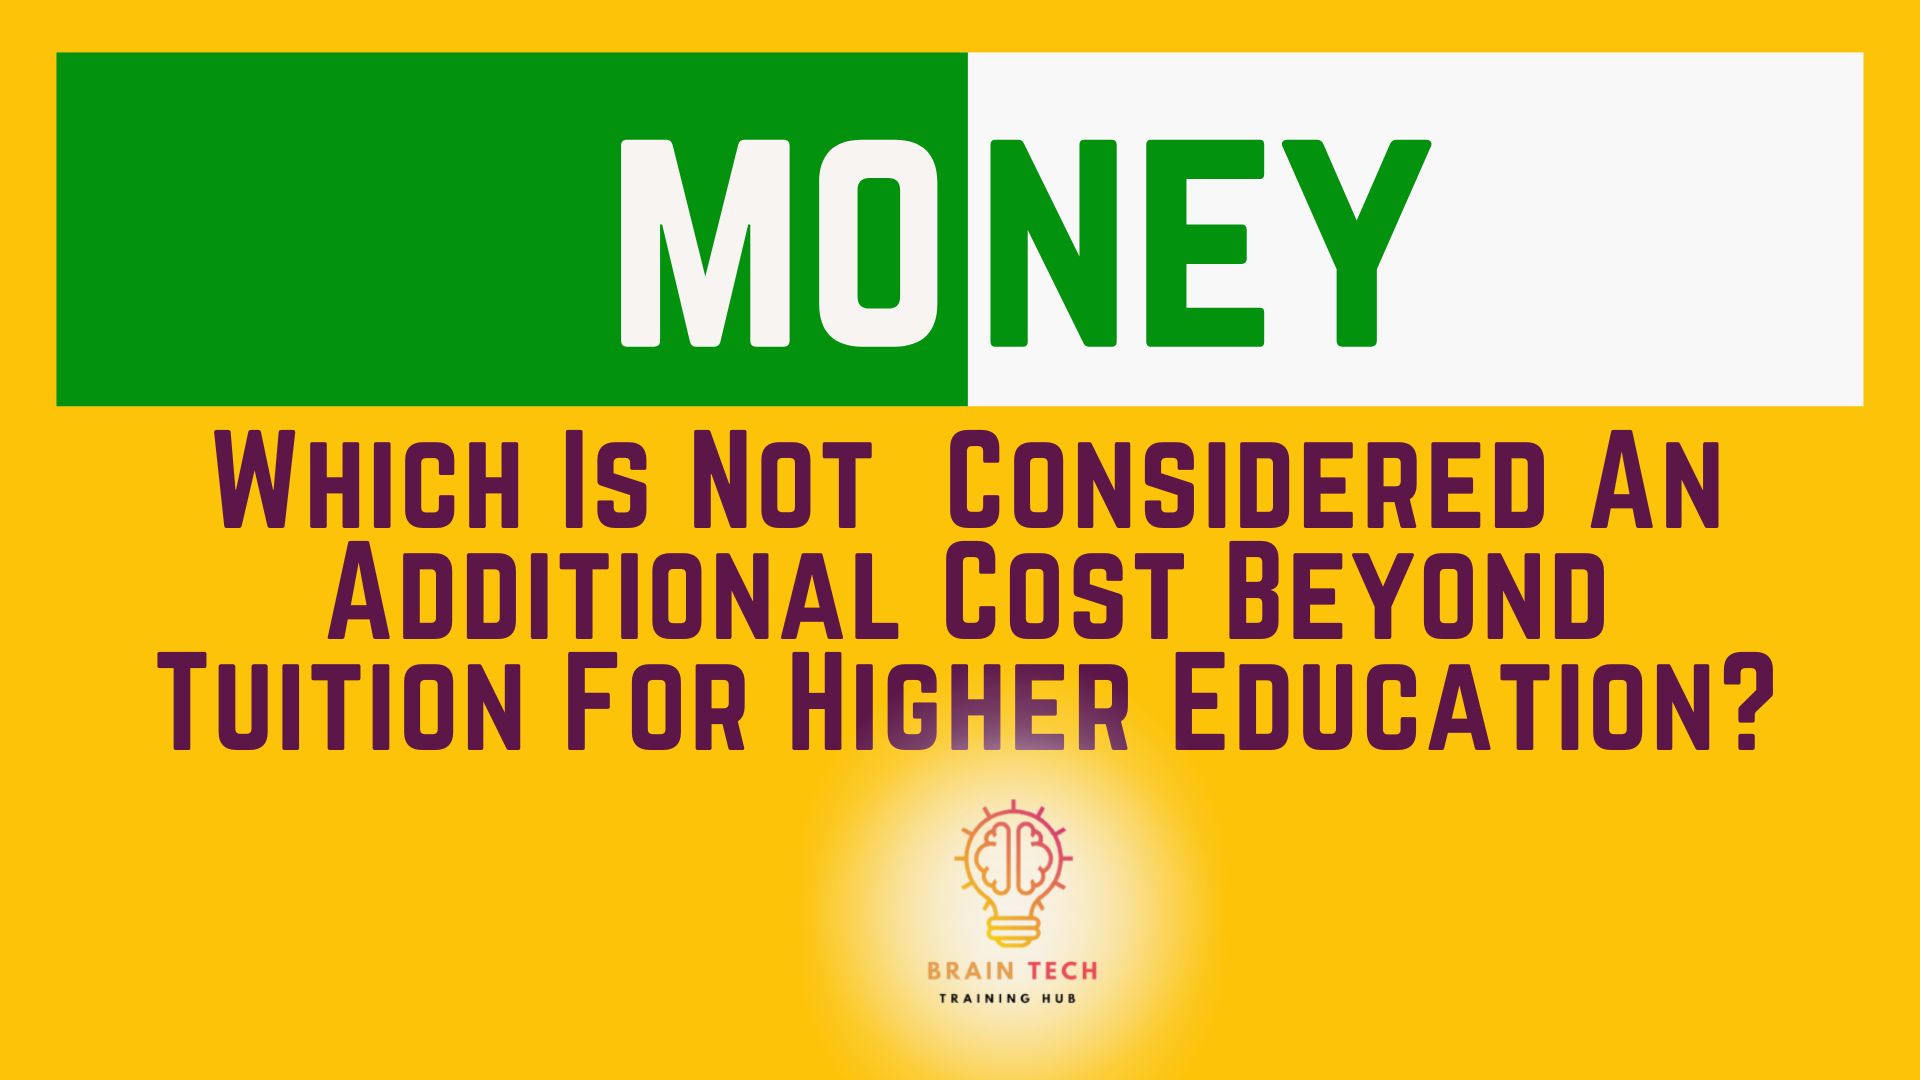 Which Is Not Considered An Additional Cost Beyond Tuition For Higher Education